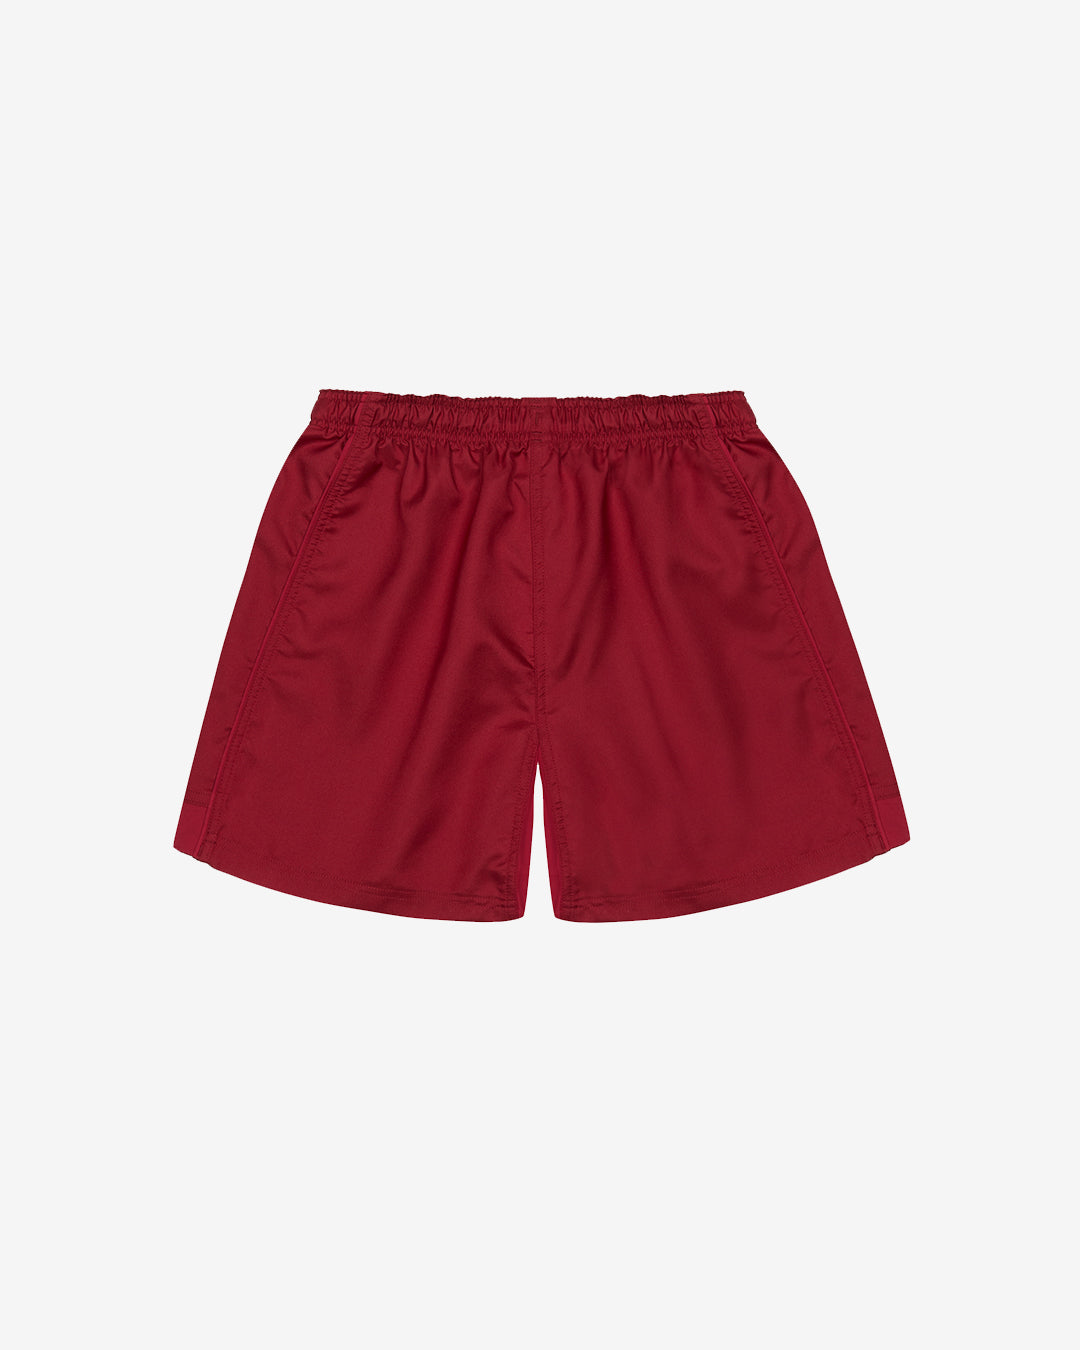 EP:0119 - Rugby Shorts - Maroon